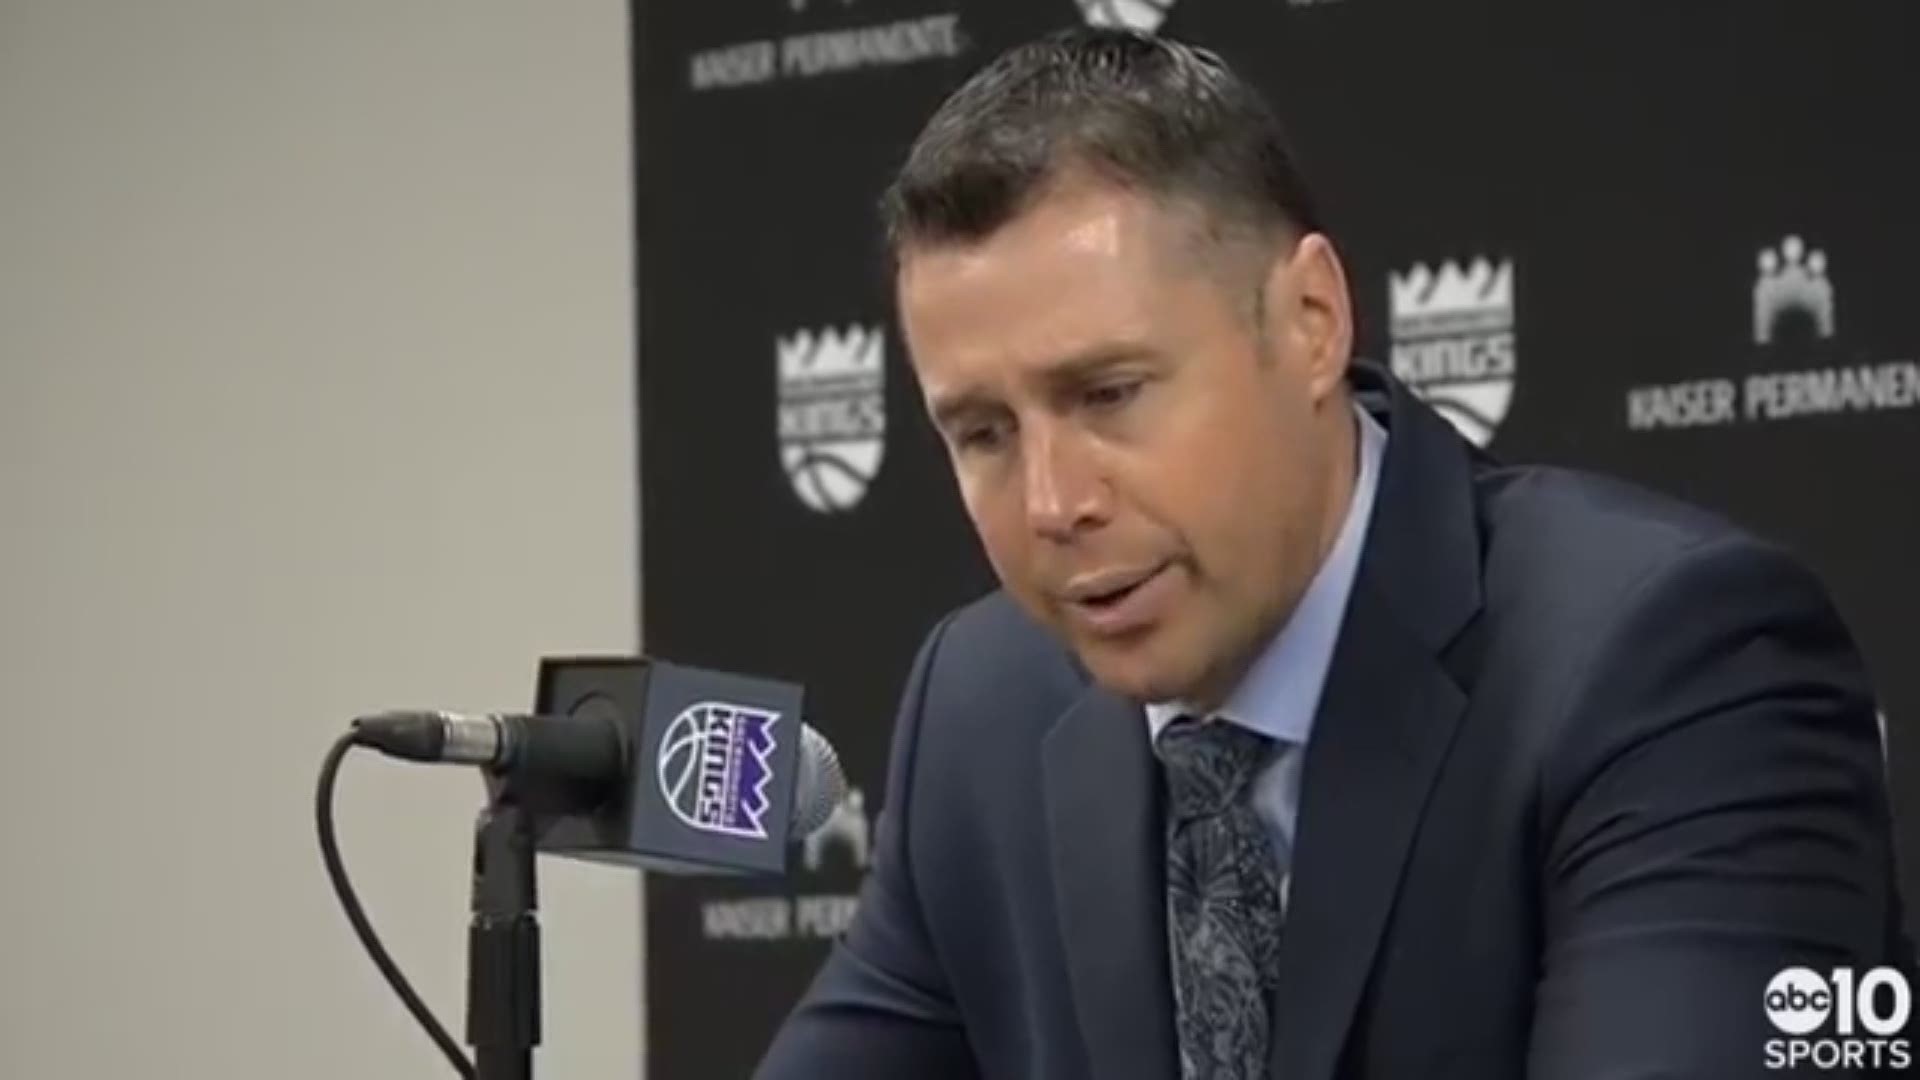 Kings head coach Dave Joerger says Sunday's win over the Chicago Bulls in blow-out fashion helped provide a little relief to his team, who has been on a tough grind since the All-Star break. He also talks about the production from Harry Giles and Marvin Bagley III.